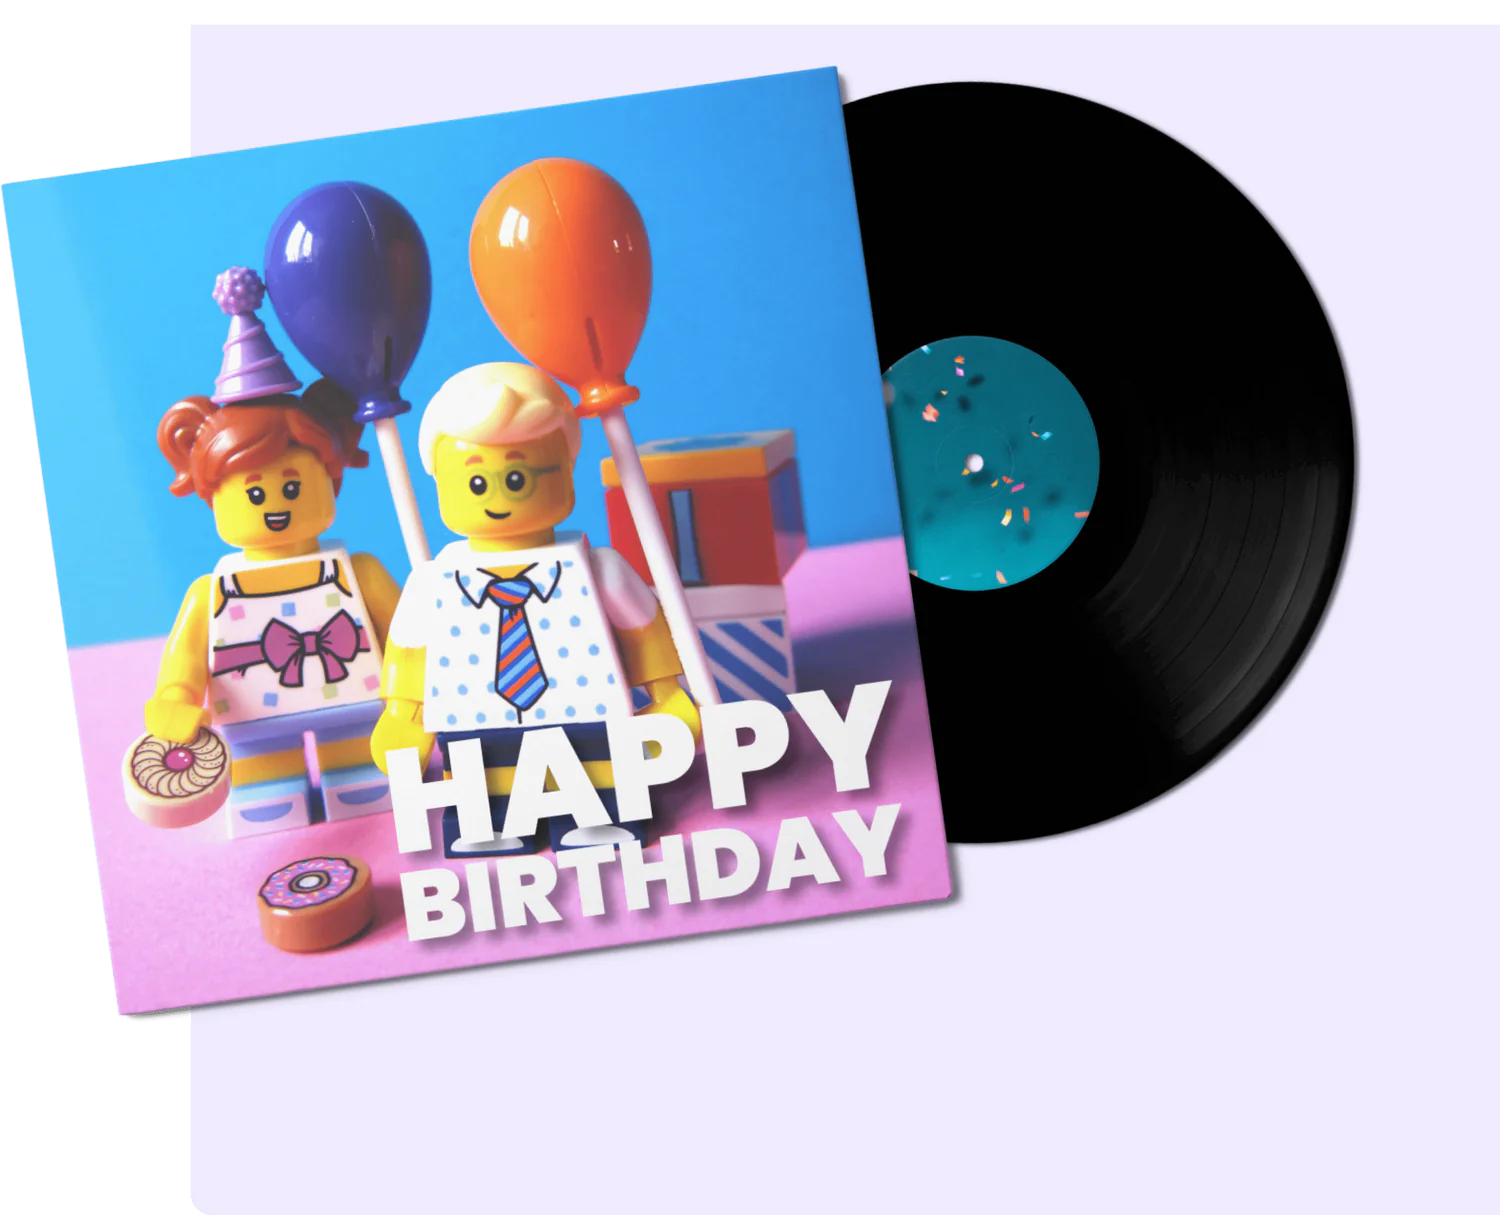 create your own vinyl record with cartoons on the cover saying happy birthday